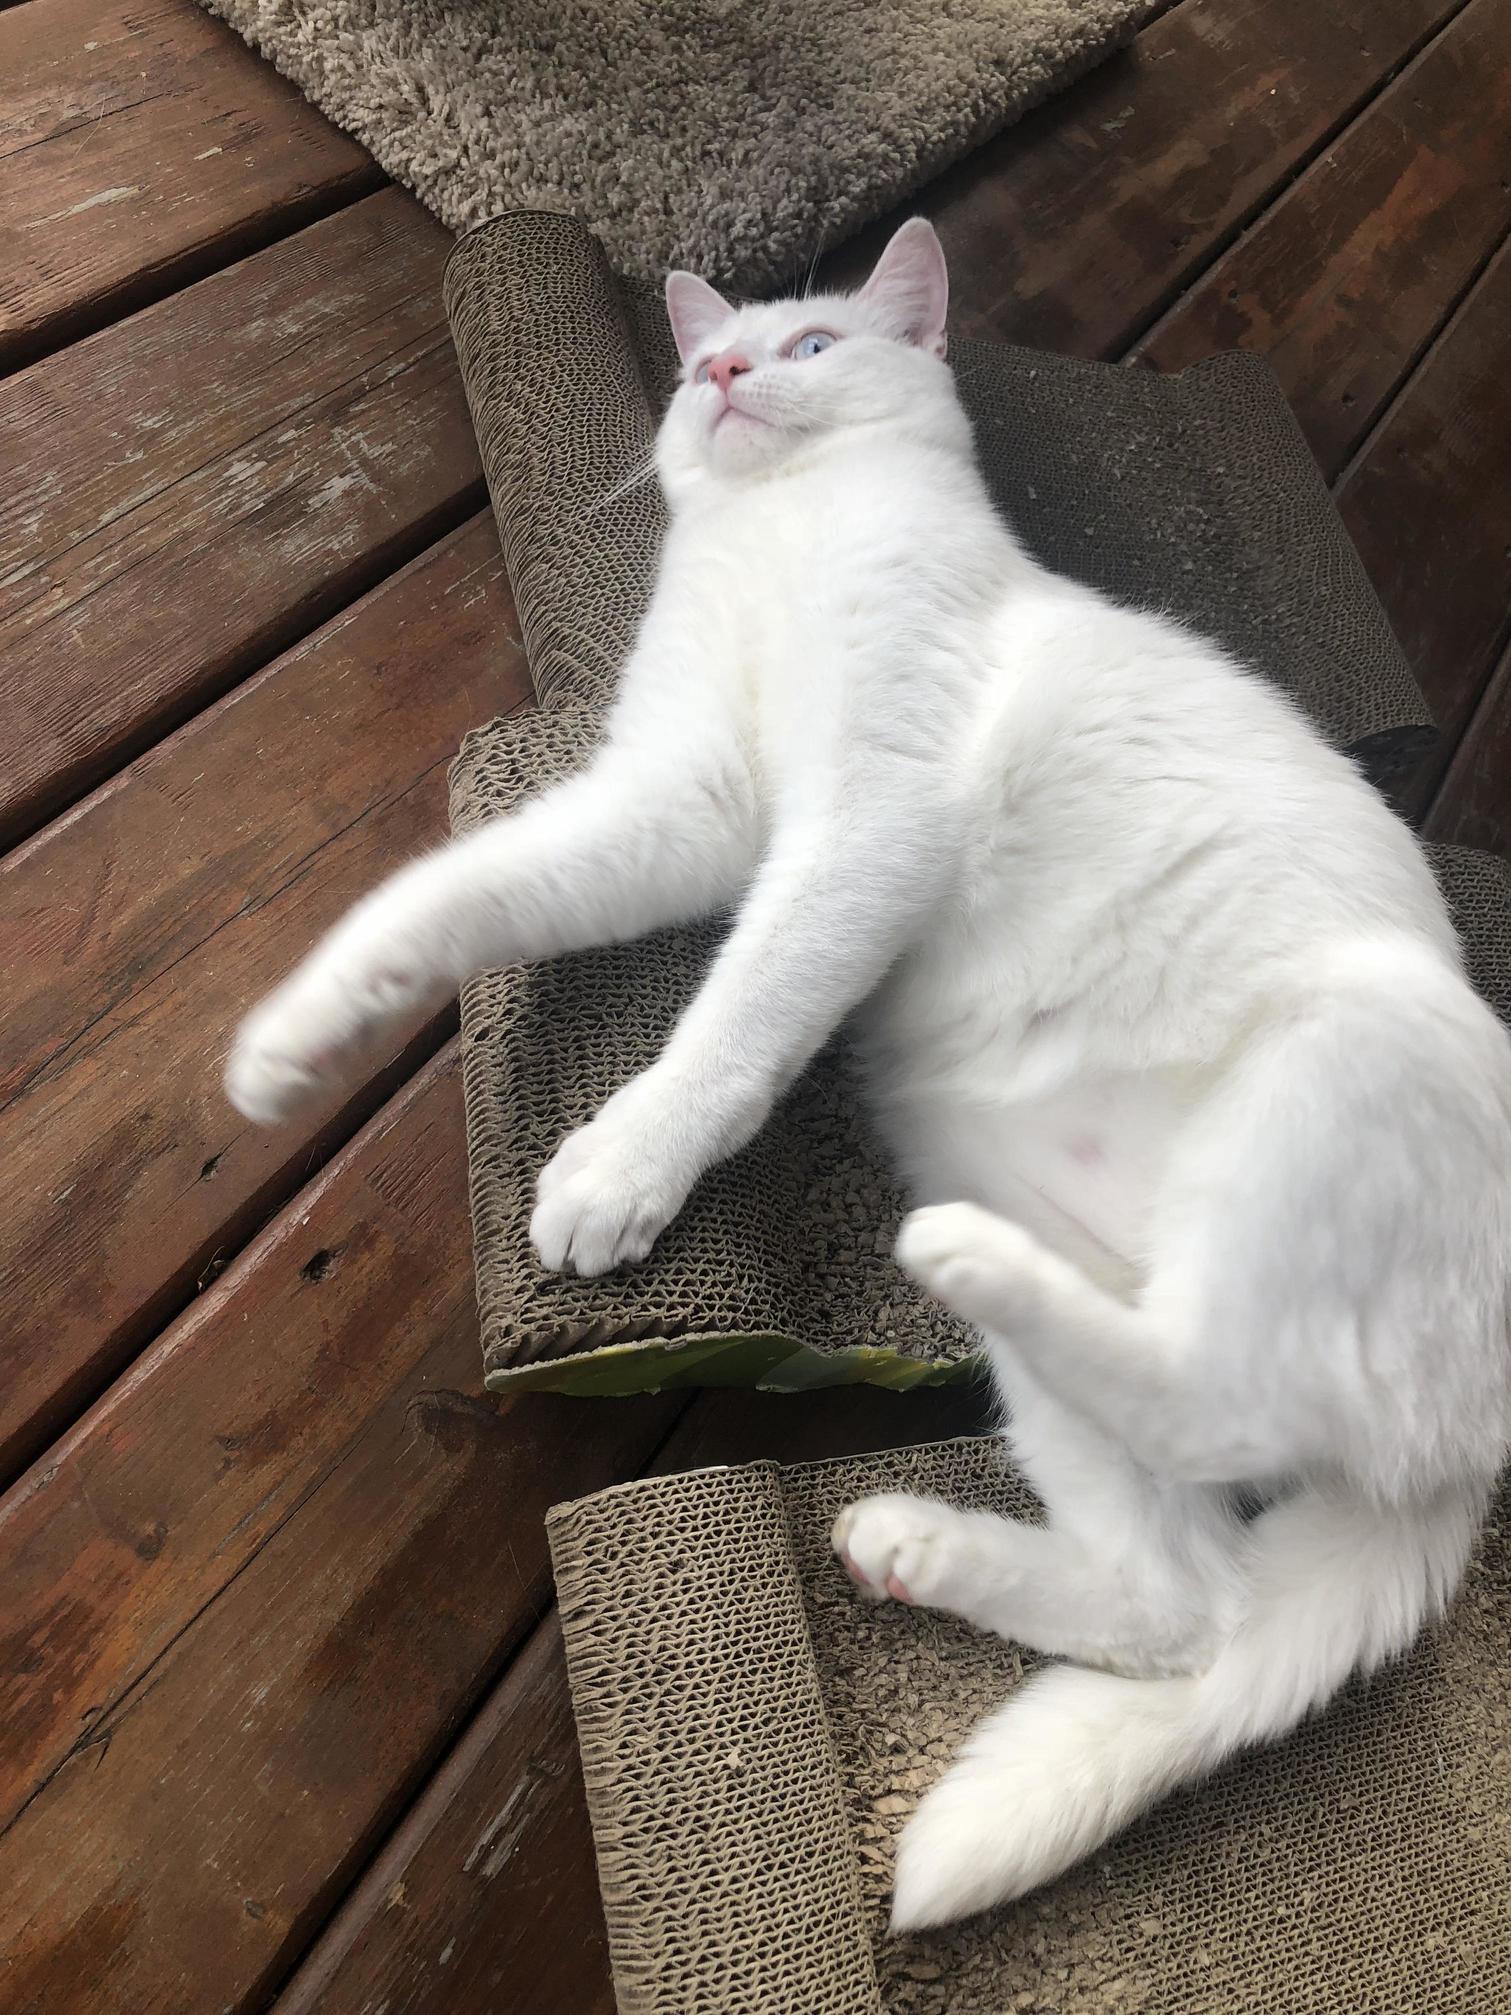 Winston lounging on the deck.